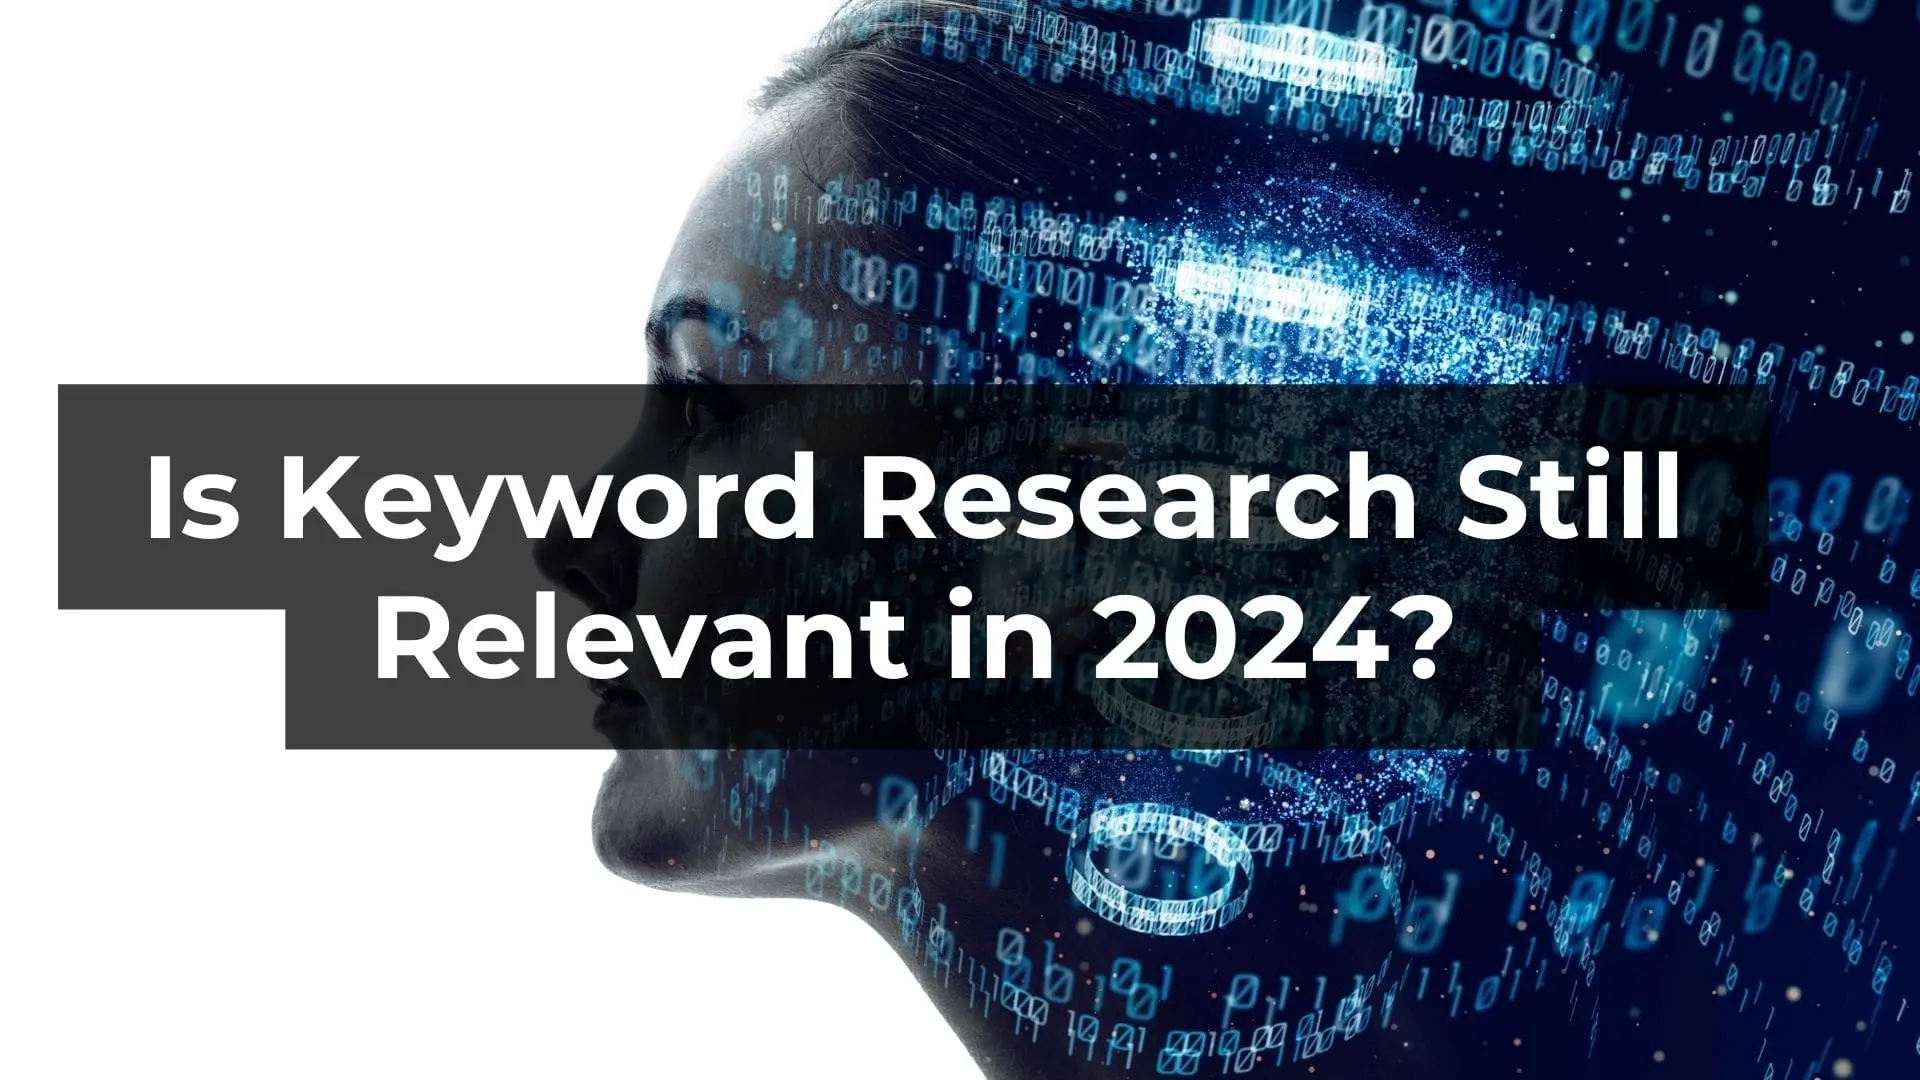 Why Keyword Research is Important